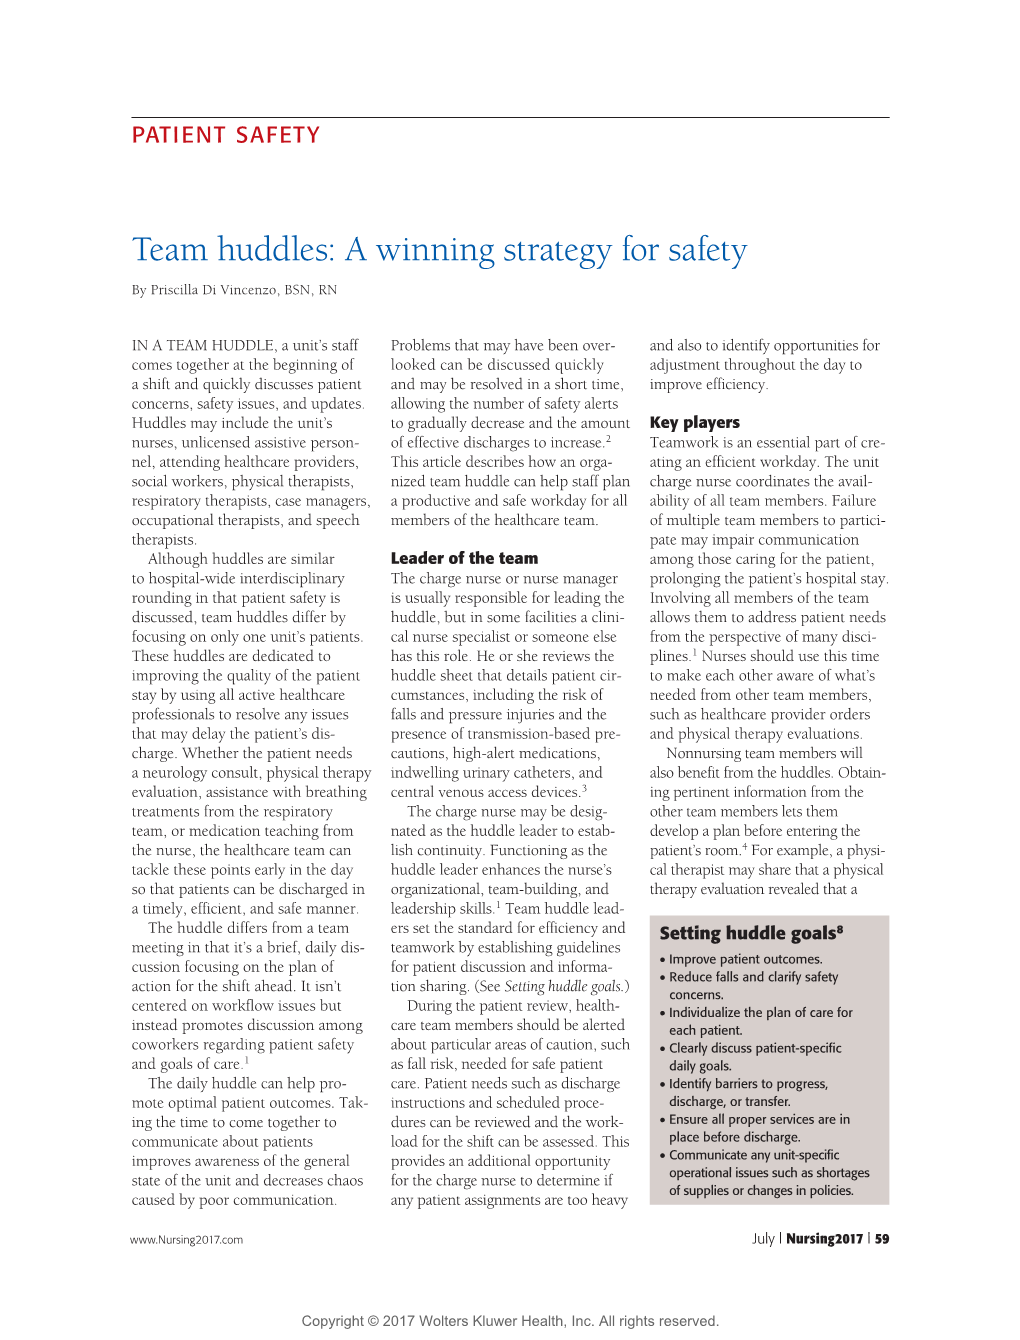 Team Huddles: a Winning Strategy for Safety by Priscilla Di Vincenzo, BSN, RN